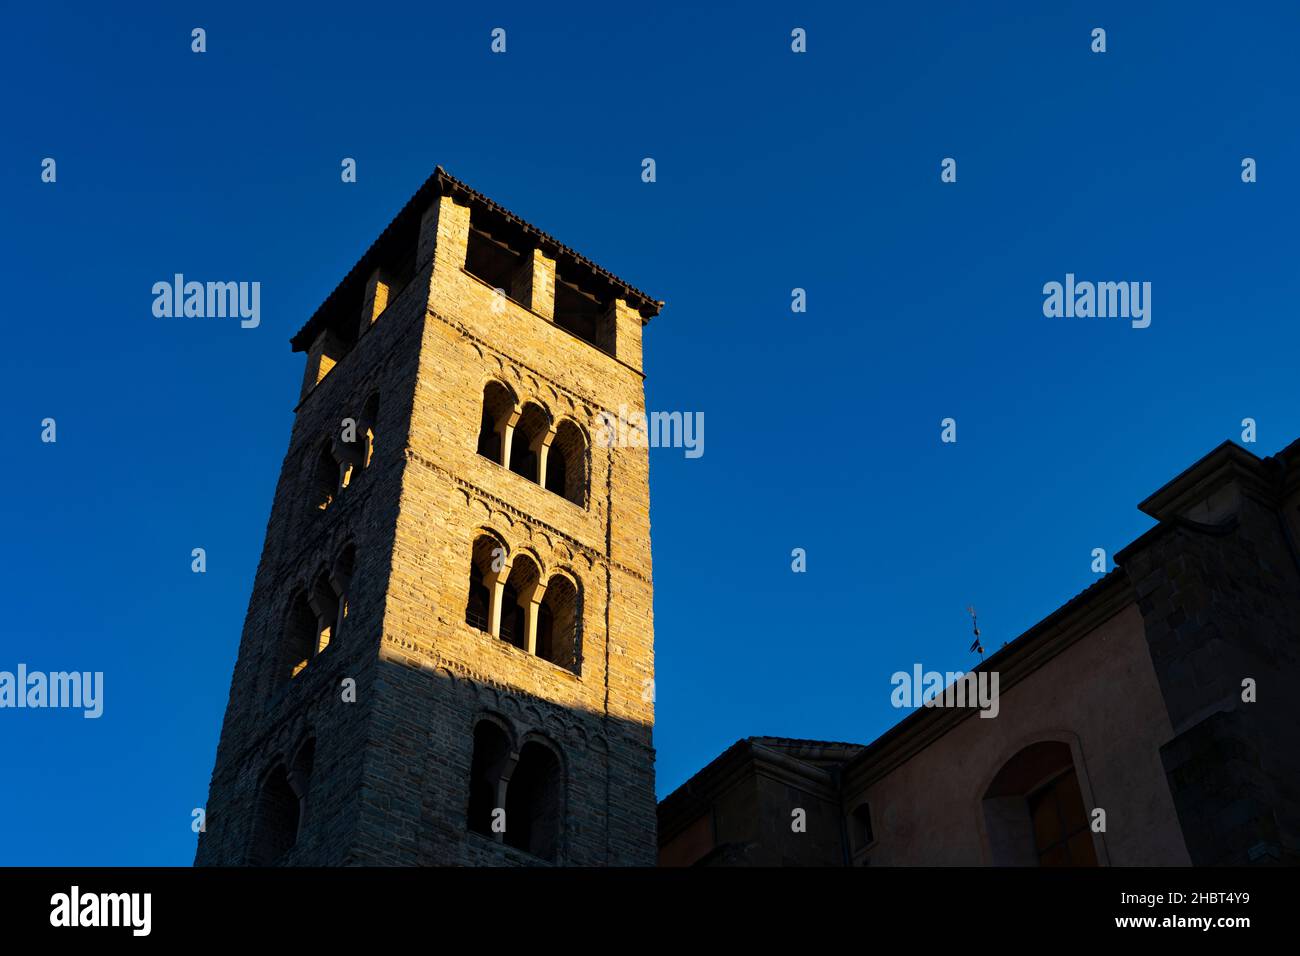 Catedral de Sant Pere de Vic, Vic, Catalonia, started in 1781, and consecrate in 1803. Some parts of the structure date to 1038. Stock Photo